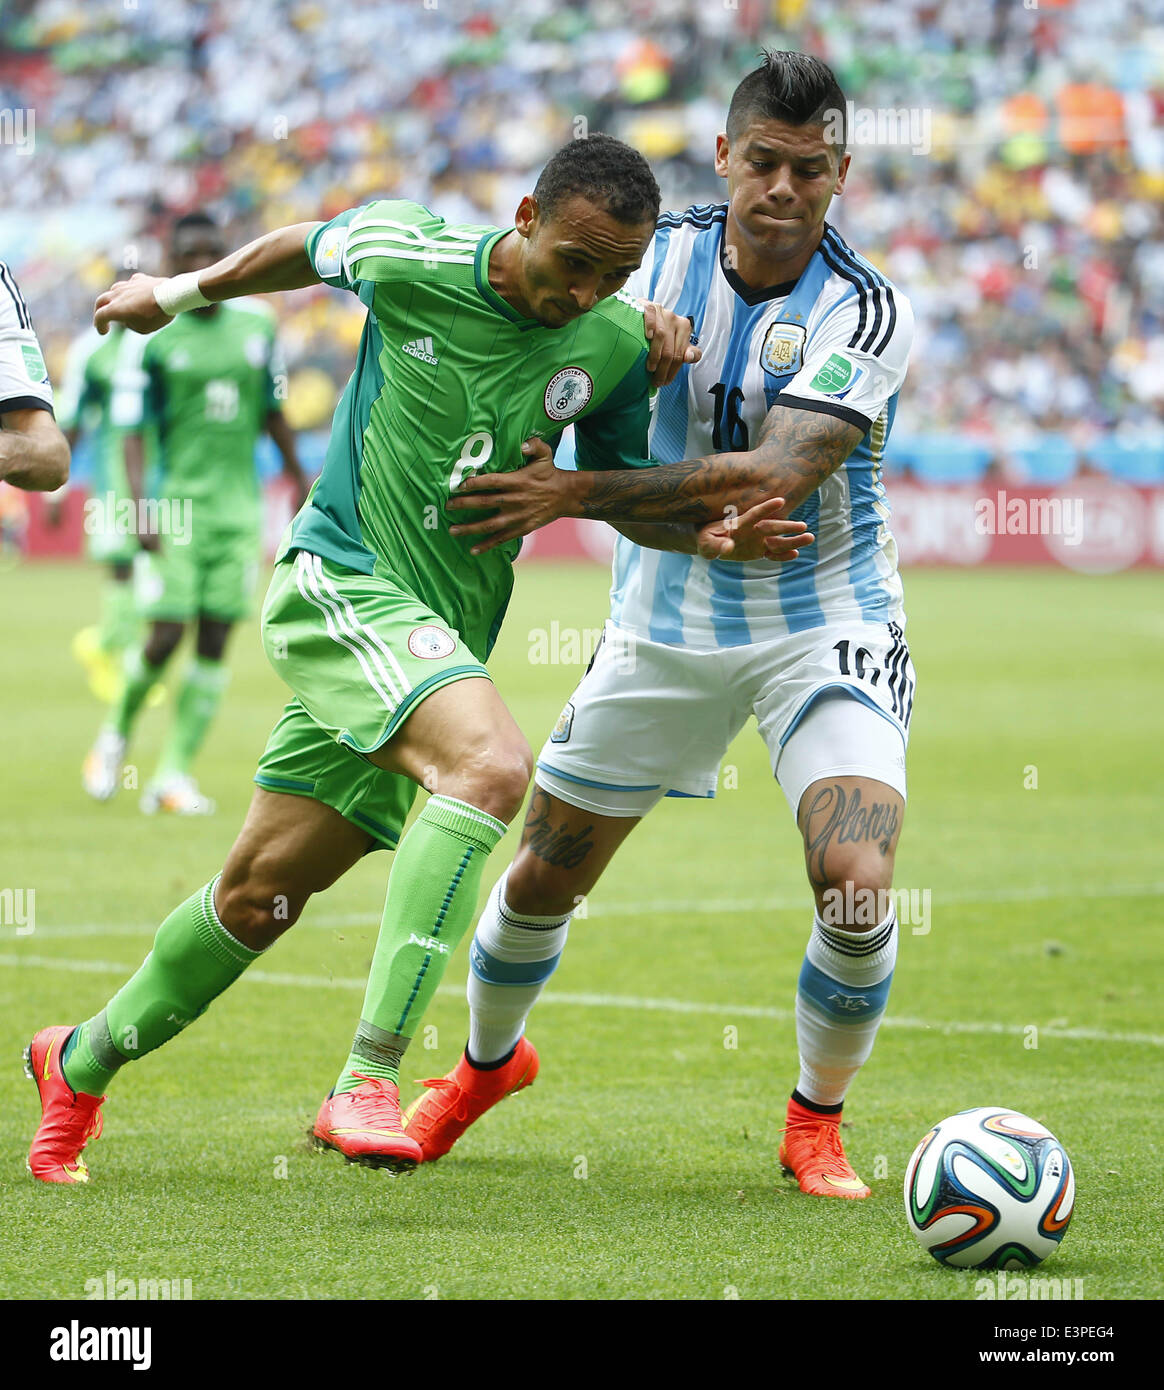 Porto Alegre, Brazil. 25th June, 2014. Nigeria's Peter Osaze Odemwingie (L) vies with Argentina's Marcos Rojo during a Group F match between Nigeria and Argentina of 2014 FIFA World Cup at the Estadio Beira-Rio Stadium in Porto Alegre, Brazil, on June 25, 2014. © Chen Jianli/Xinhua/Alamy Live News Stock Photo